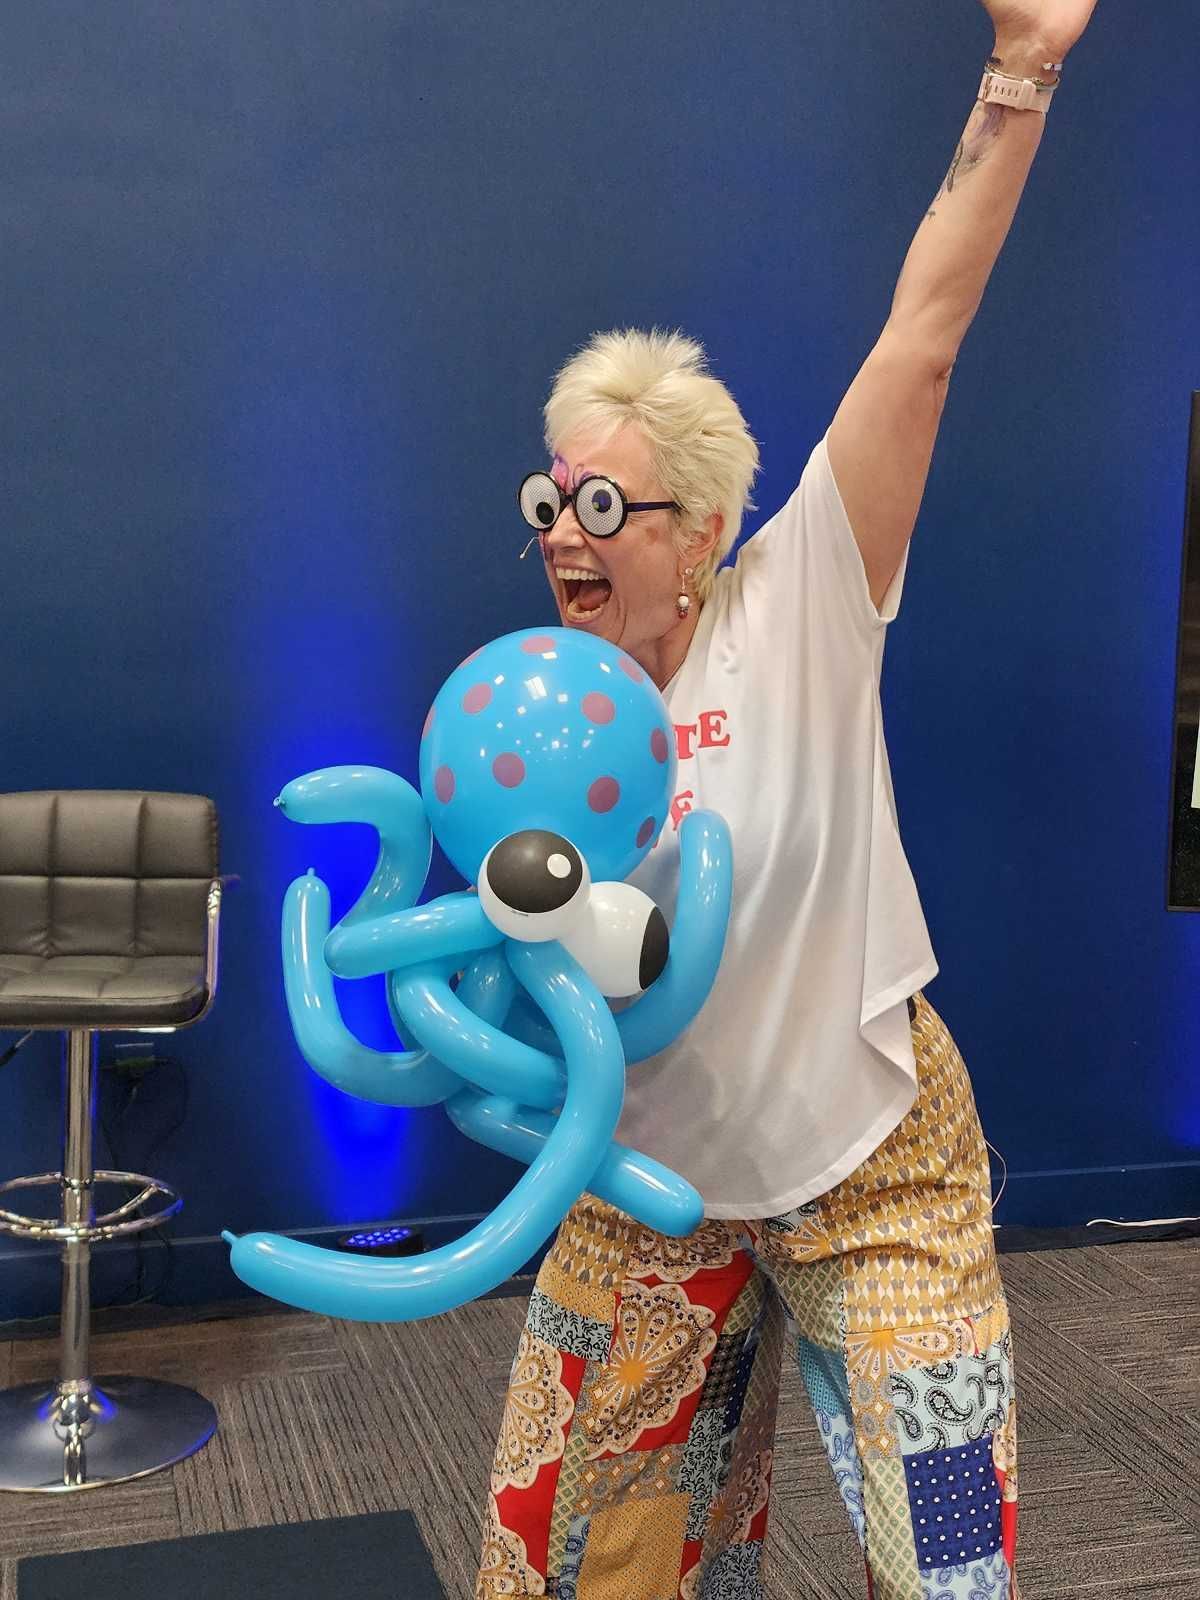 image of julie with an octopus balloon and big eye glasses showing her fun side